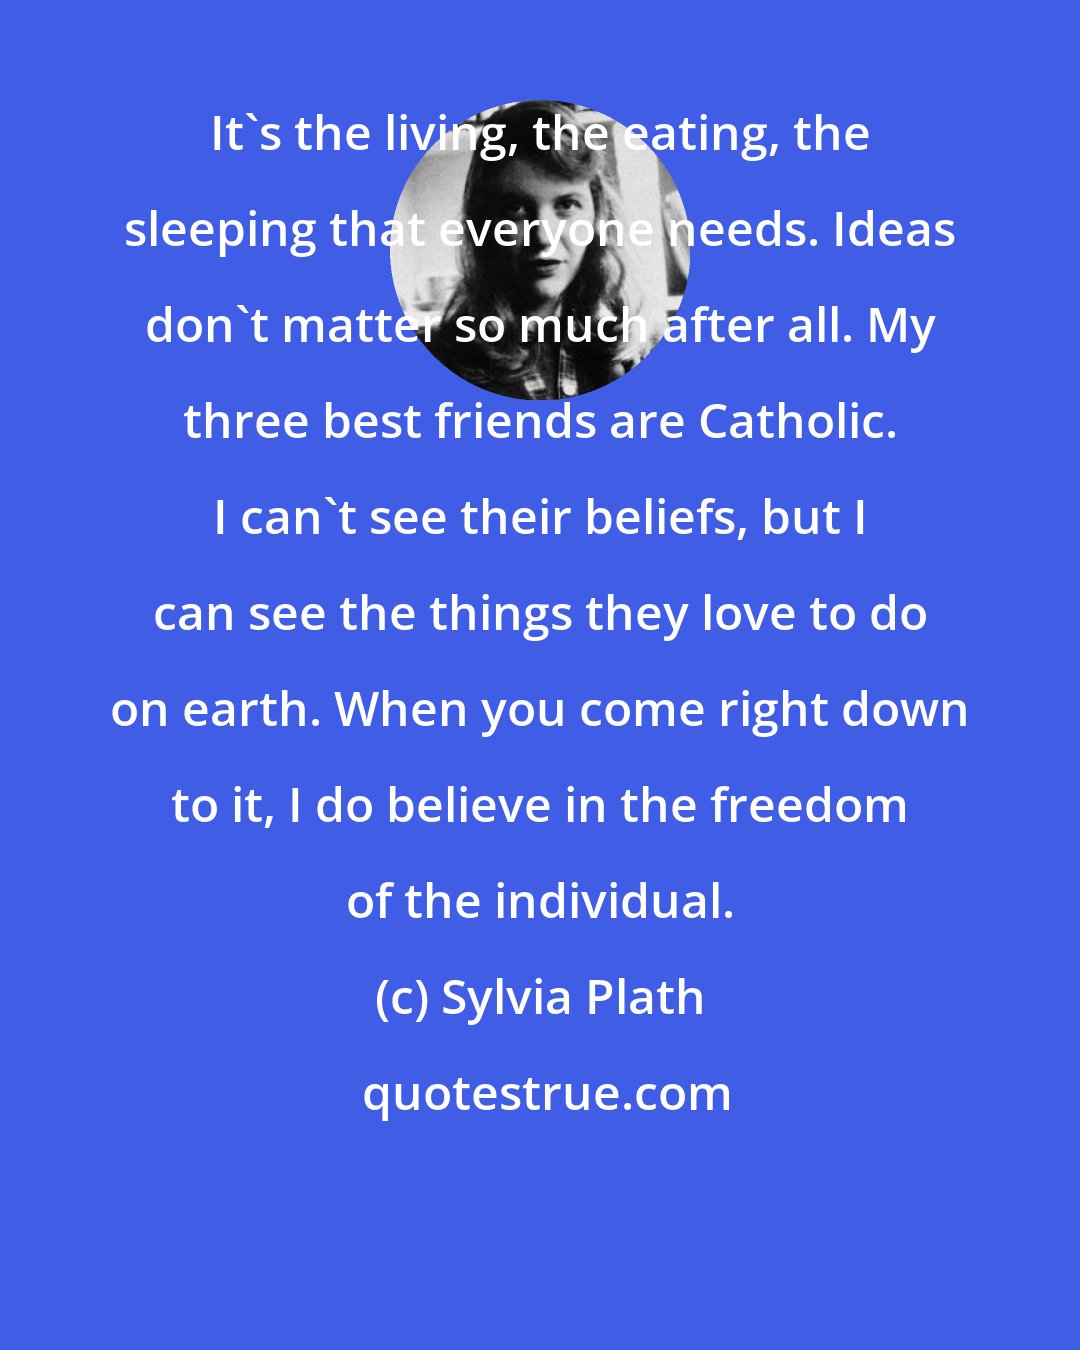 Sylvia Plath: It's the living, the eating, the sleeping that everyone needs. Ideas don't matter so much after all. My three best friends are Catholic. I can't see their beliefs, but I can see the things they love to do on earth. When you come right down to it, I do believe in the freedom of the individual.